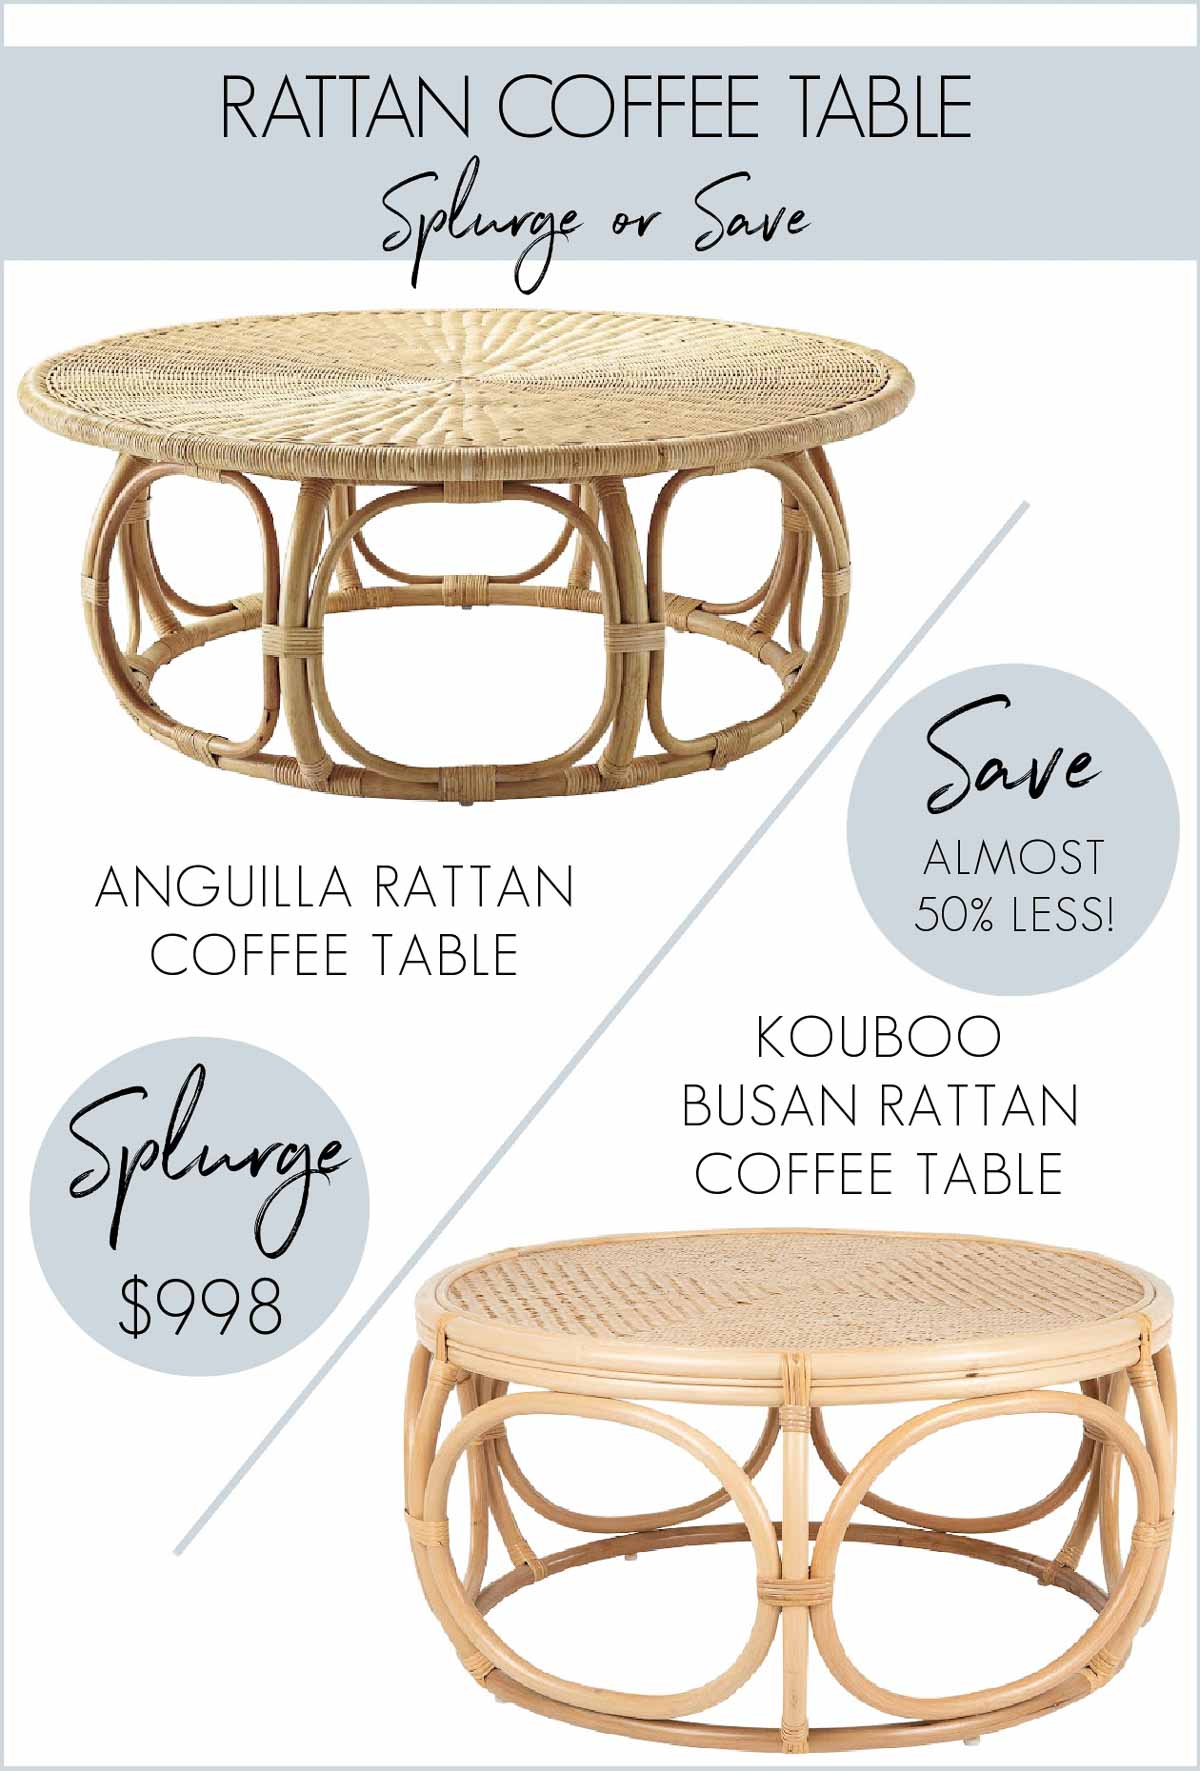 Serena & Lily Anguilla Rattan Coffee Table look for less - a favorite cheap home decor find!